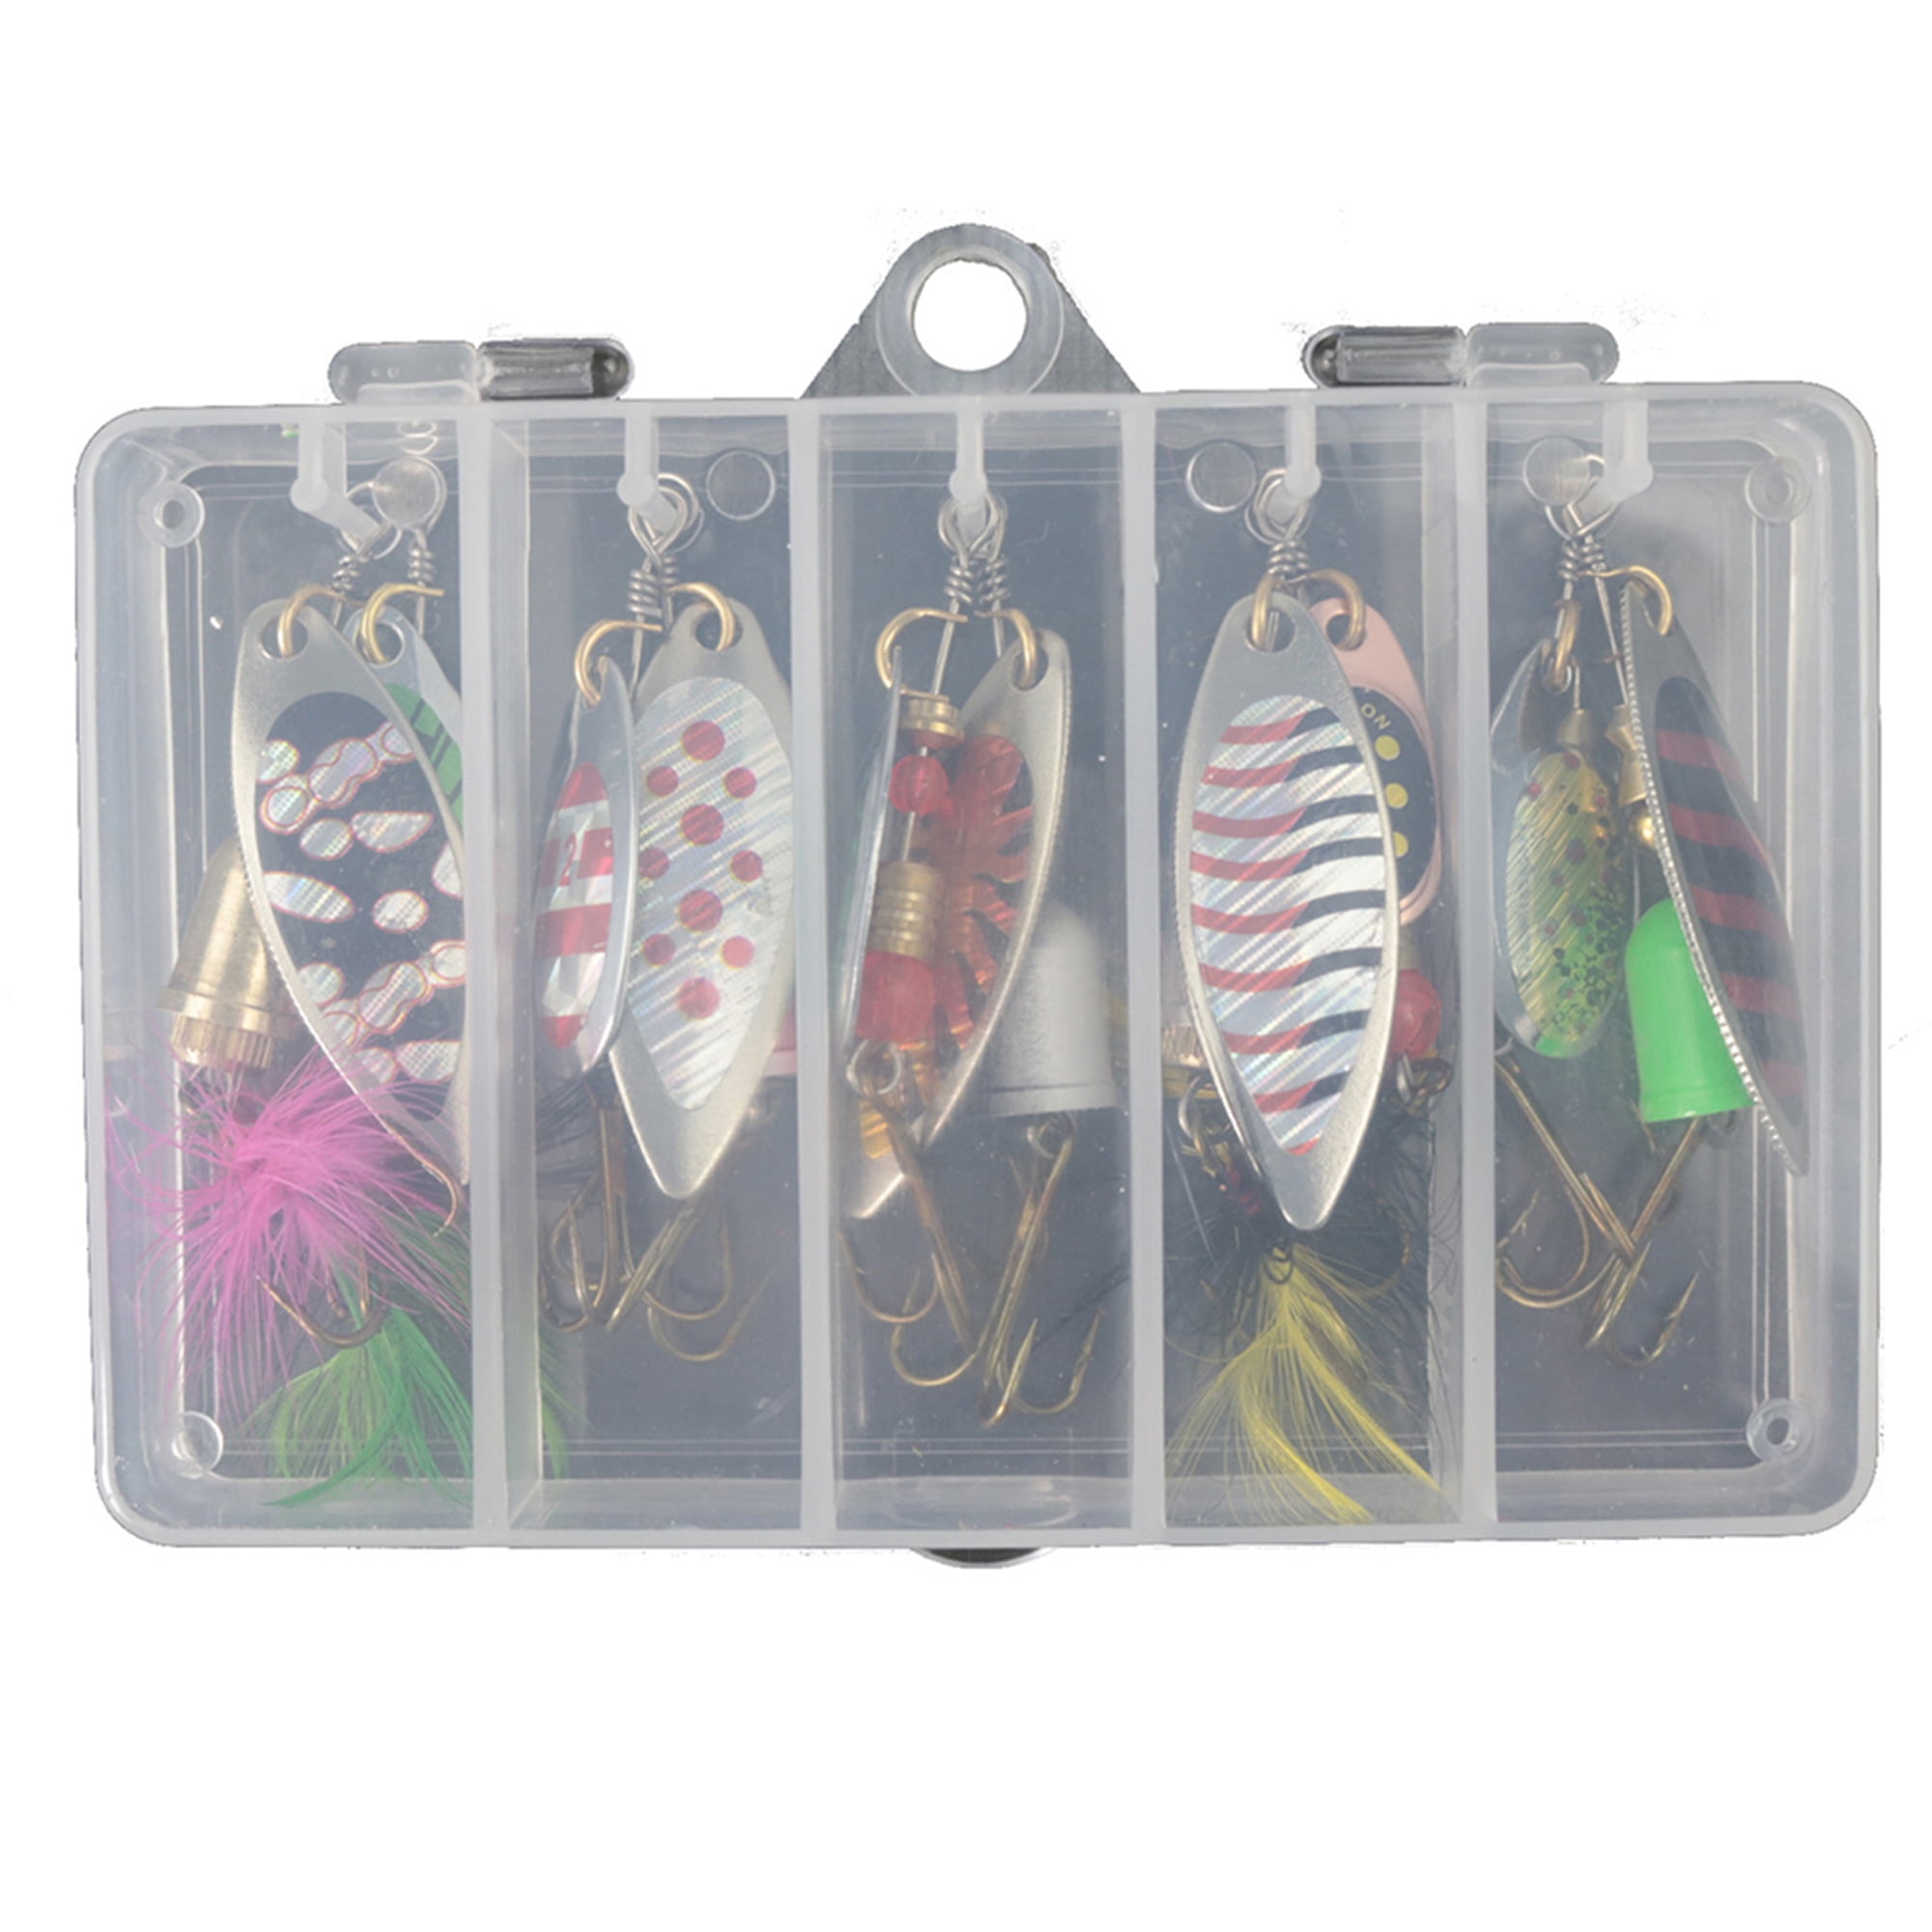 10PcsFishing Spinners And Lures, Spinnerbaits in Zinc Alloy, Fishing Lures Spoon, Sequins Fishing Tackle With Storage Box For Pike Trout Bass Salmon